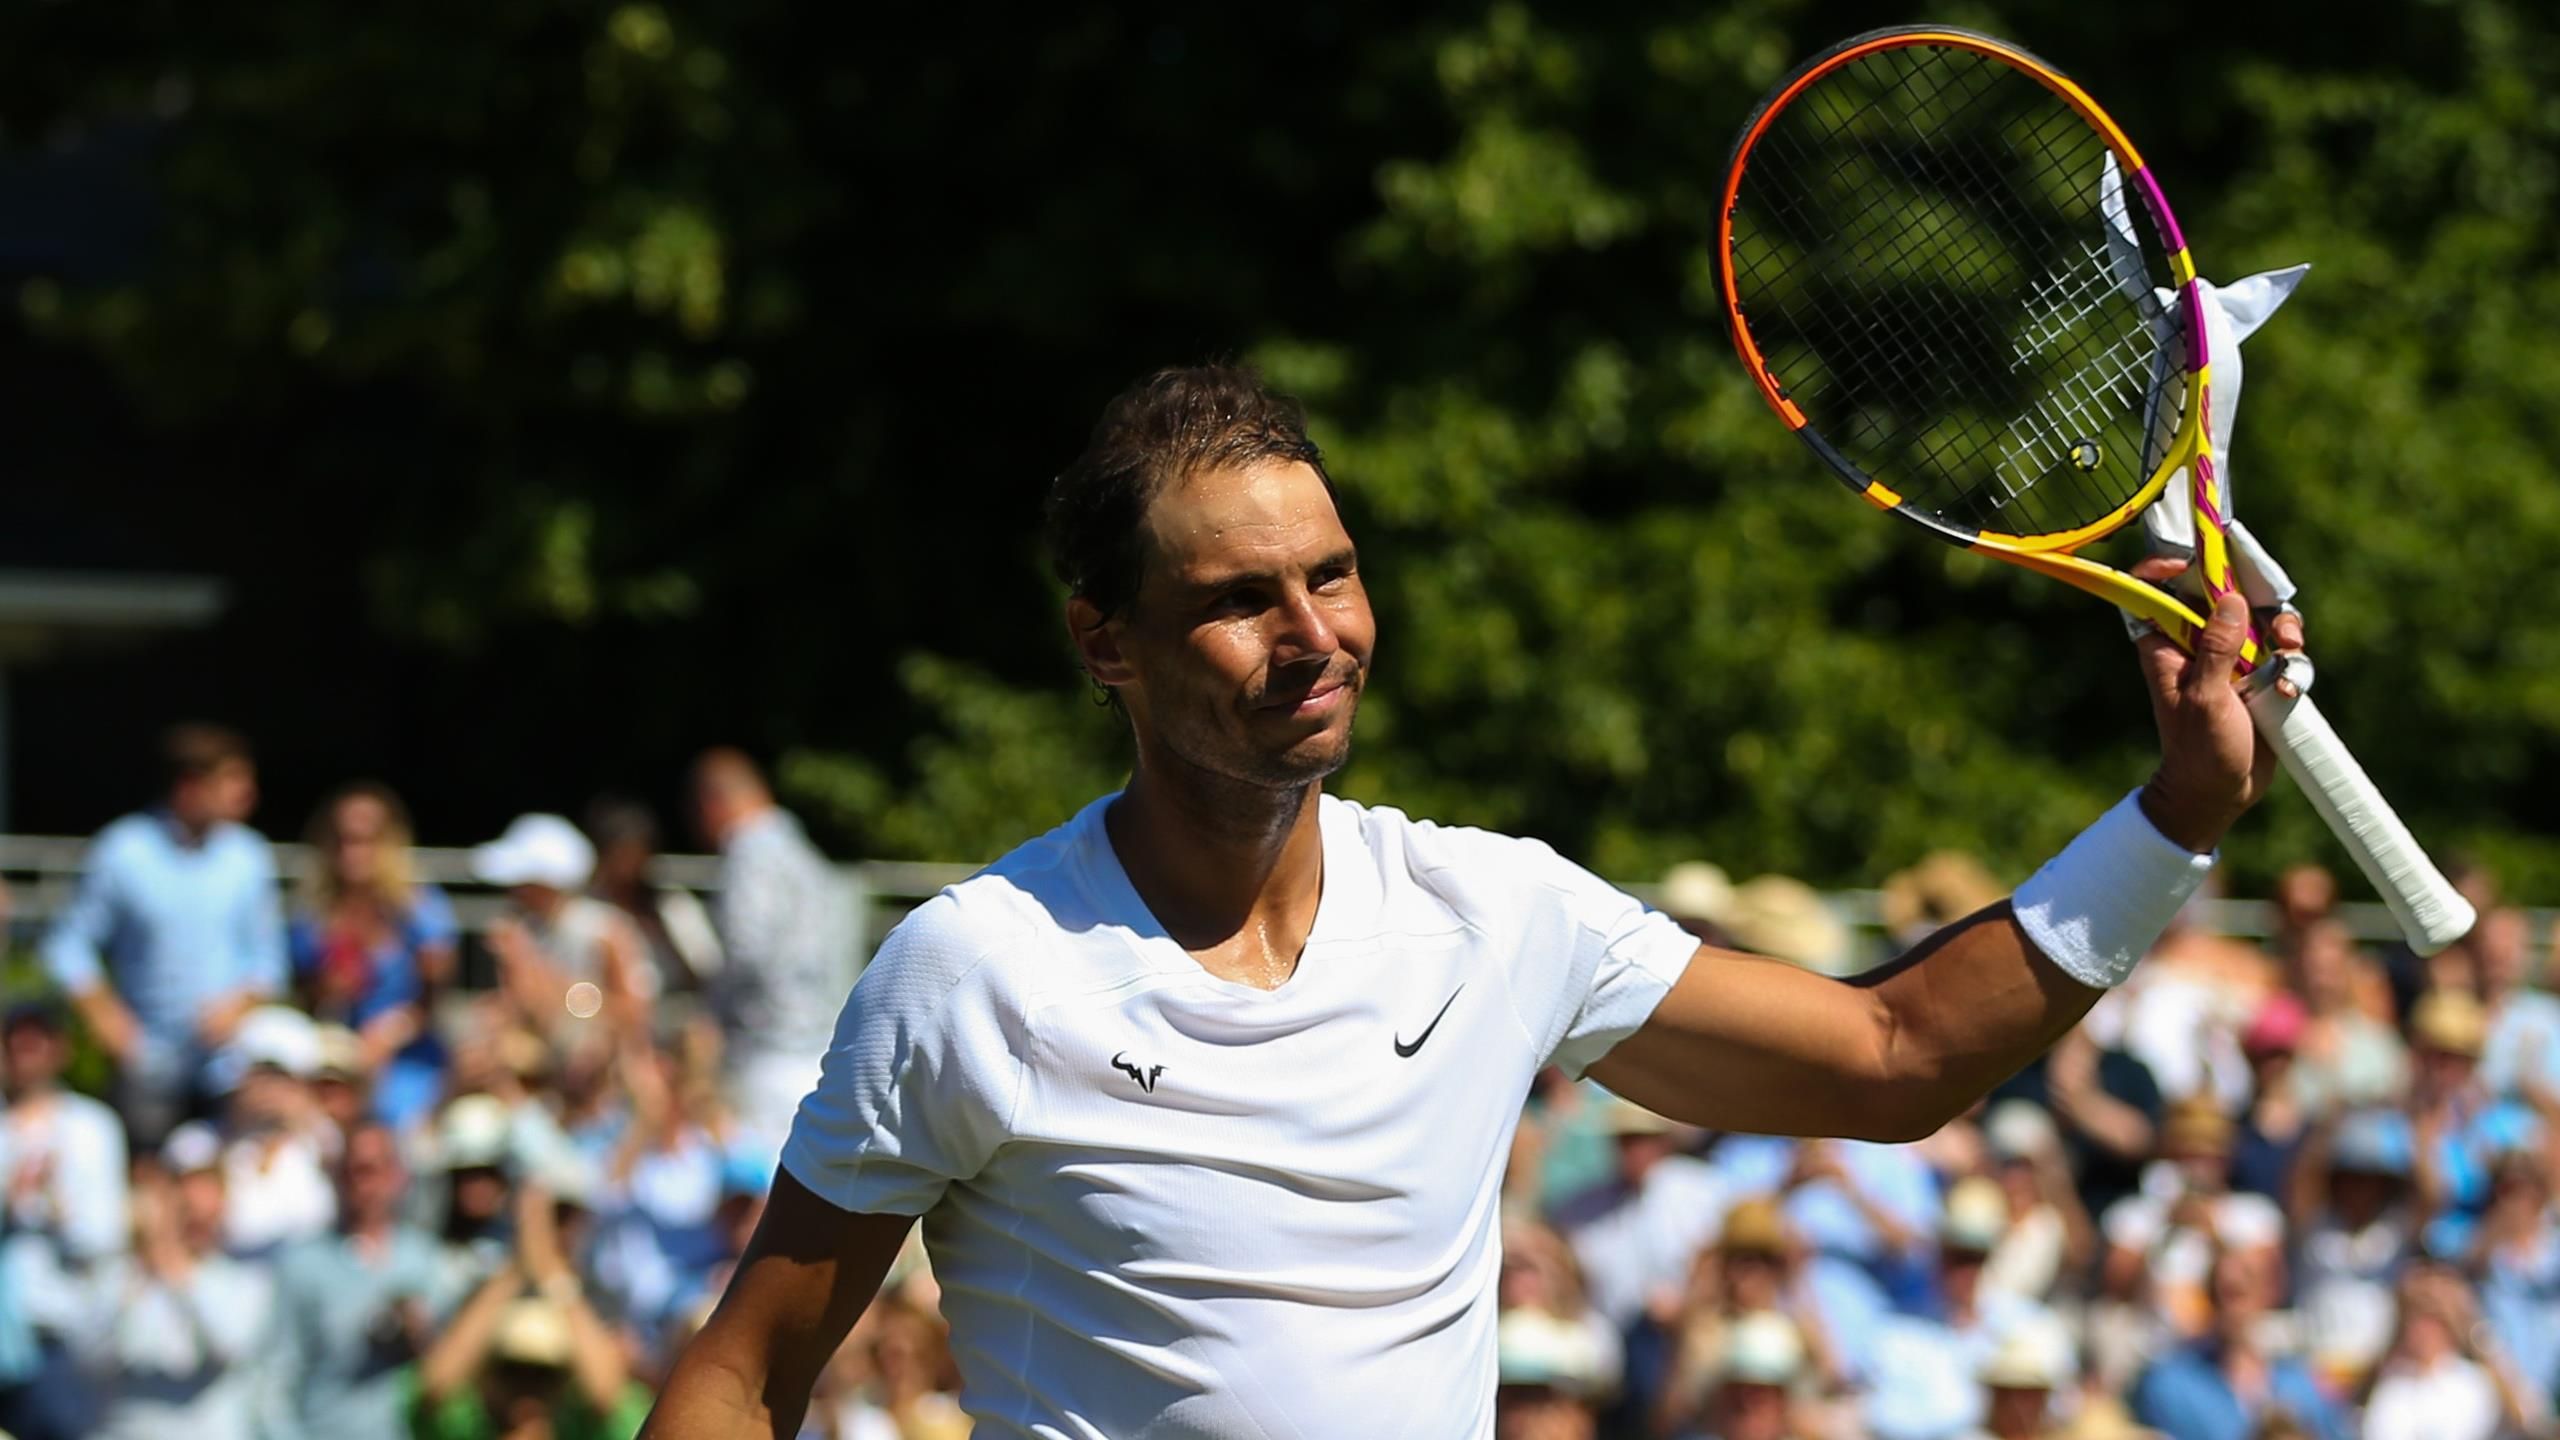 Perfect to play a couple of matches - Rafael Nadal wins his first match back on grass at Hurlingham in London